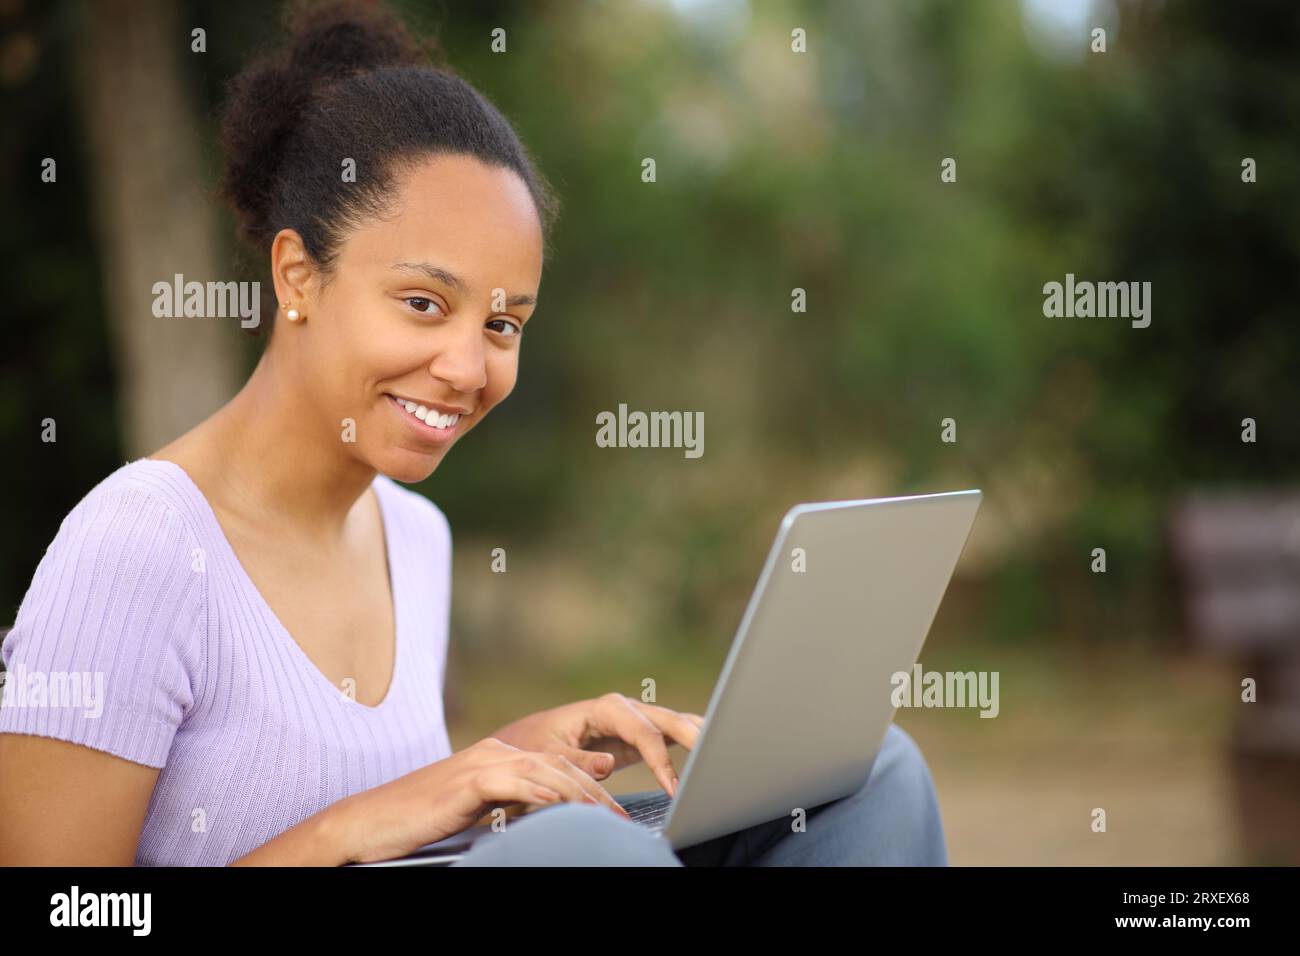 Black woman looks at you using laptop sitting in a park Stock Photo